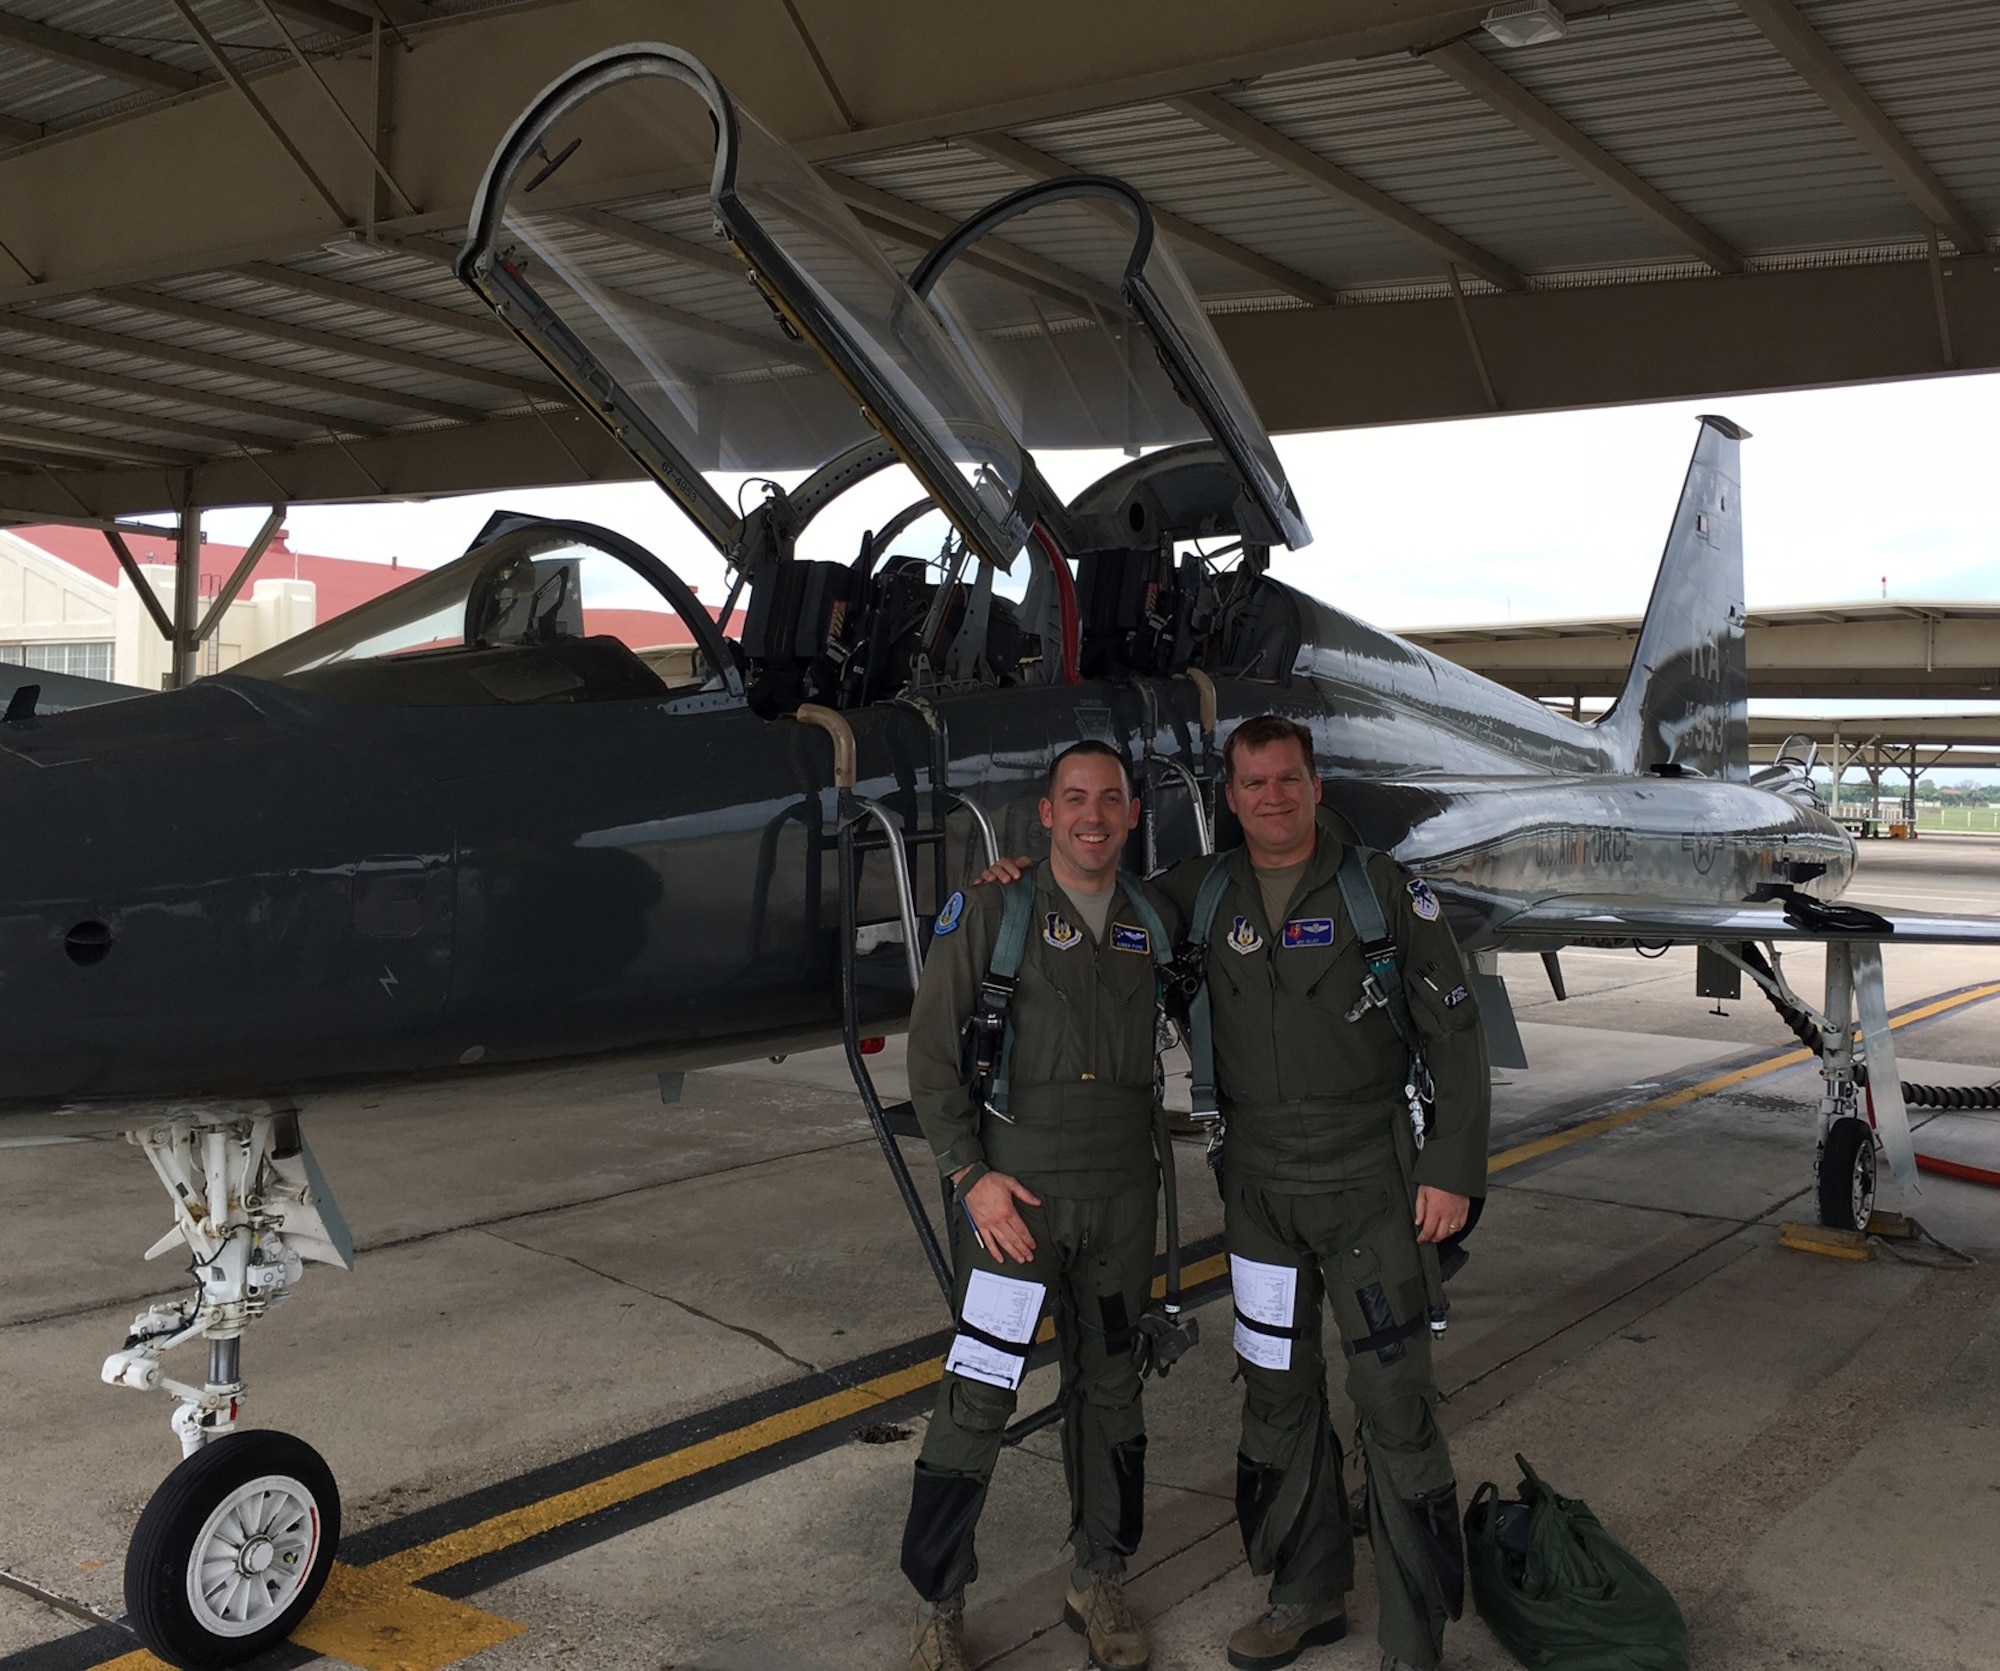 Maj. William ‘Bubba’ Pope (L) pauses for a photo with Lt. Col. Matthew ‘MIG’ Alley on the flight line at Laughlin Air Force Base, Texas. (Courtesy photo).